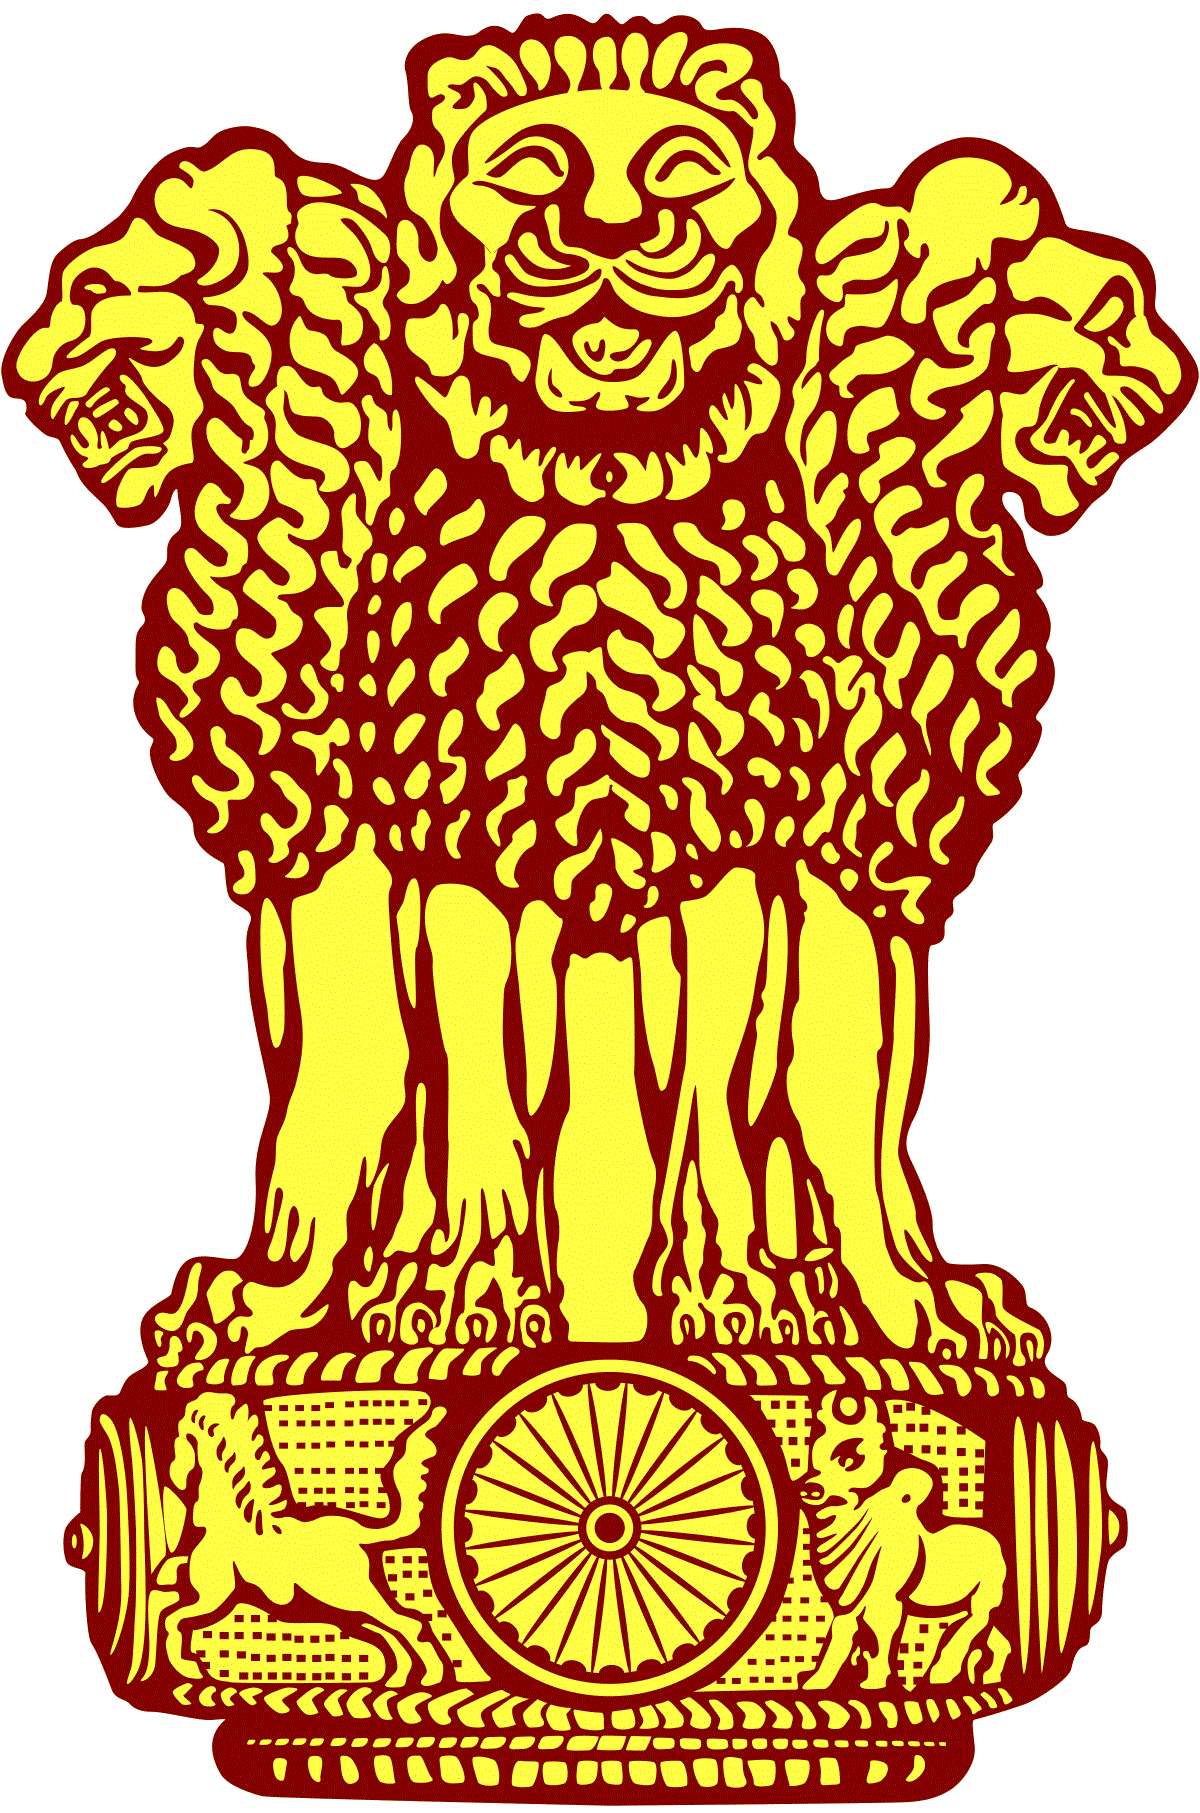 Government of India National Emblem